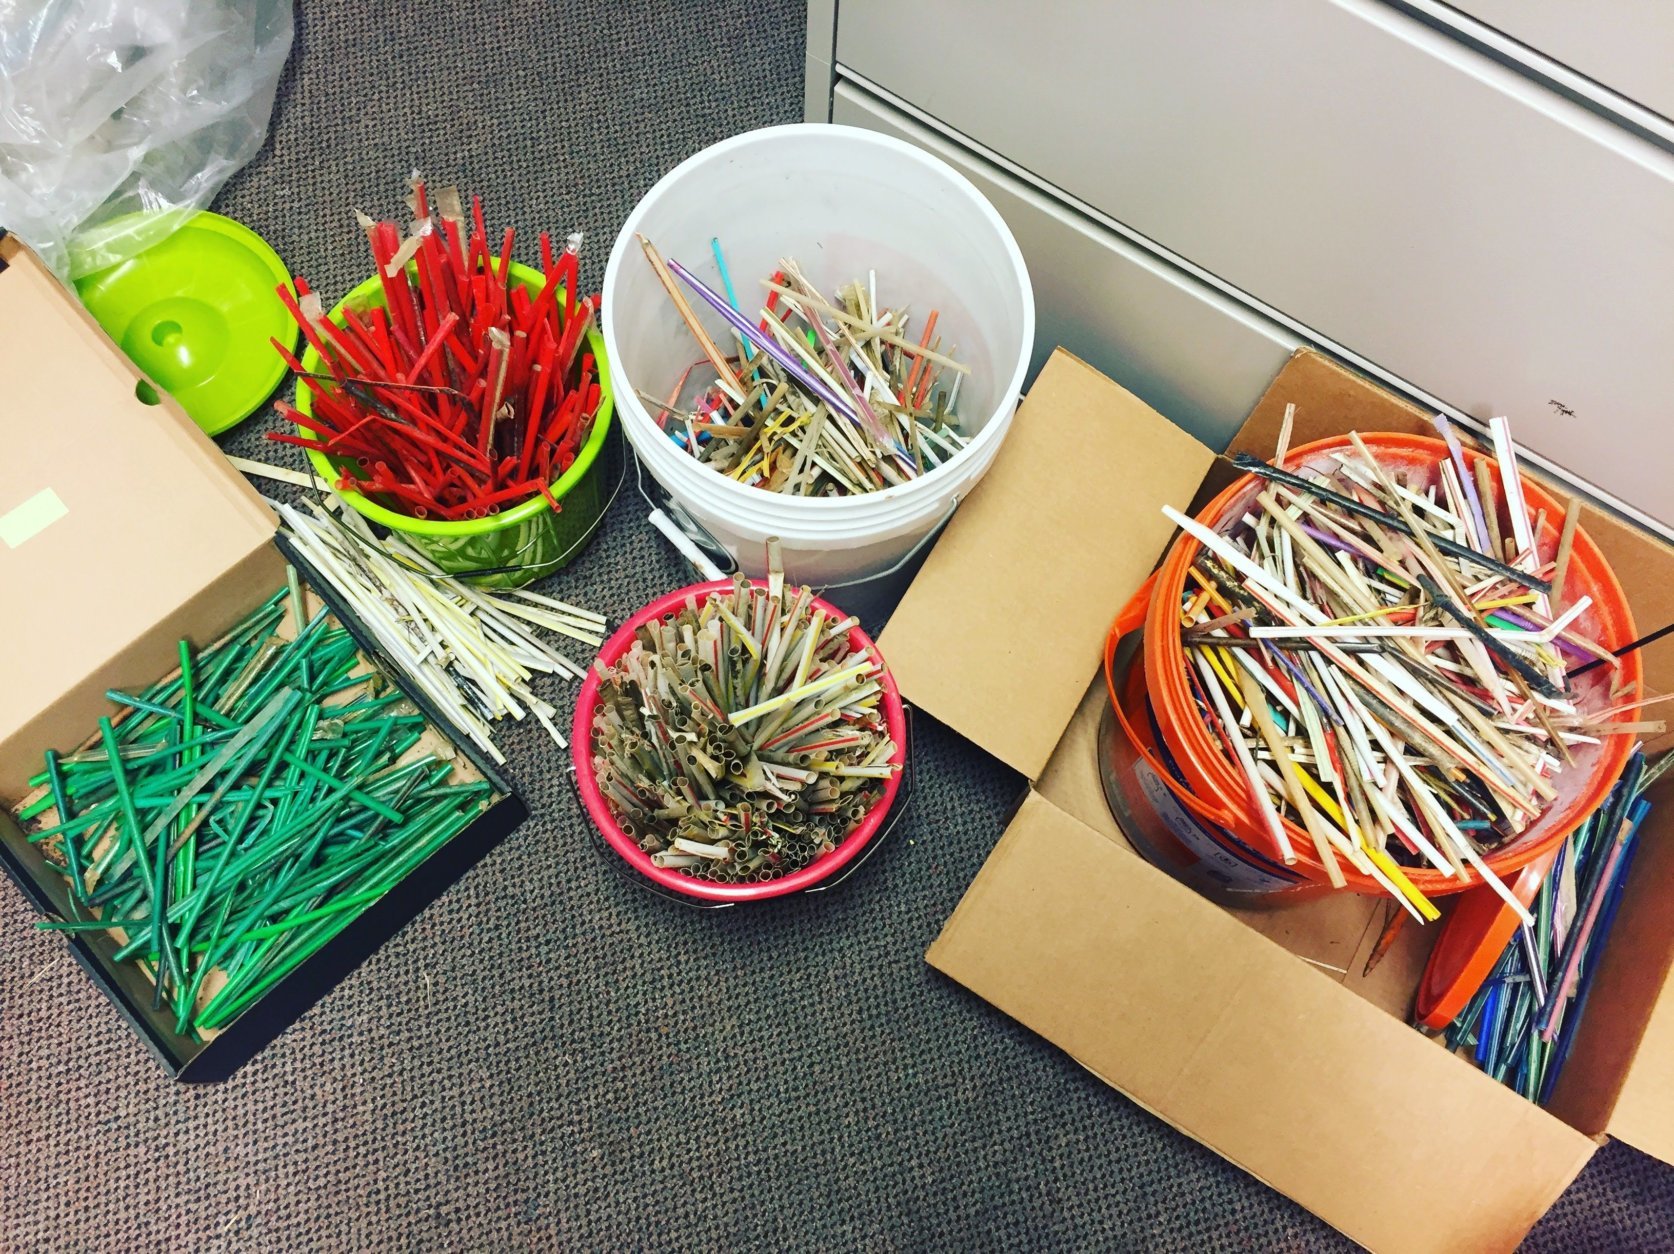 These 4,026 straws were collected at 30 sites in the Anacostia Watershed on Earth Day, April 21, 2018. (Courtesy Anacostia Watershed Society)